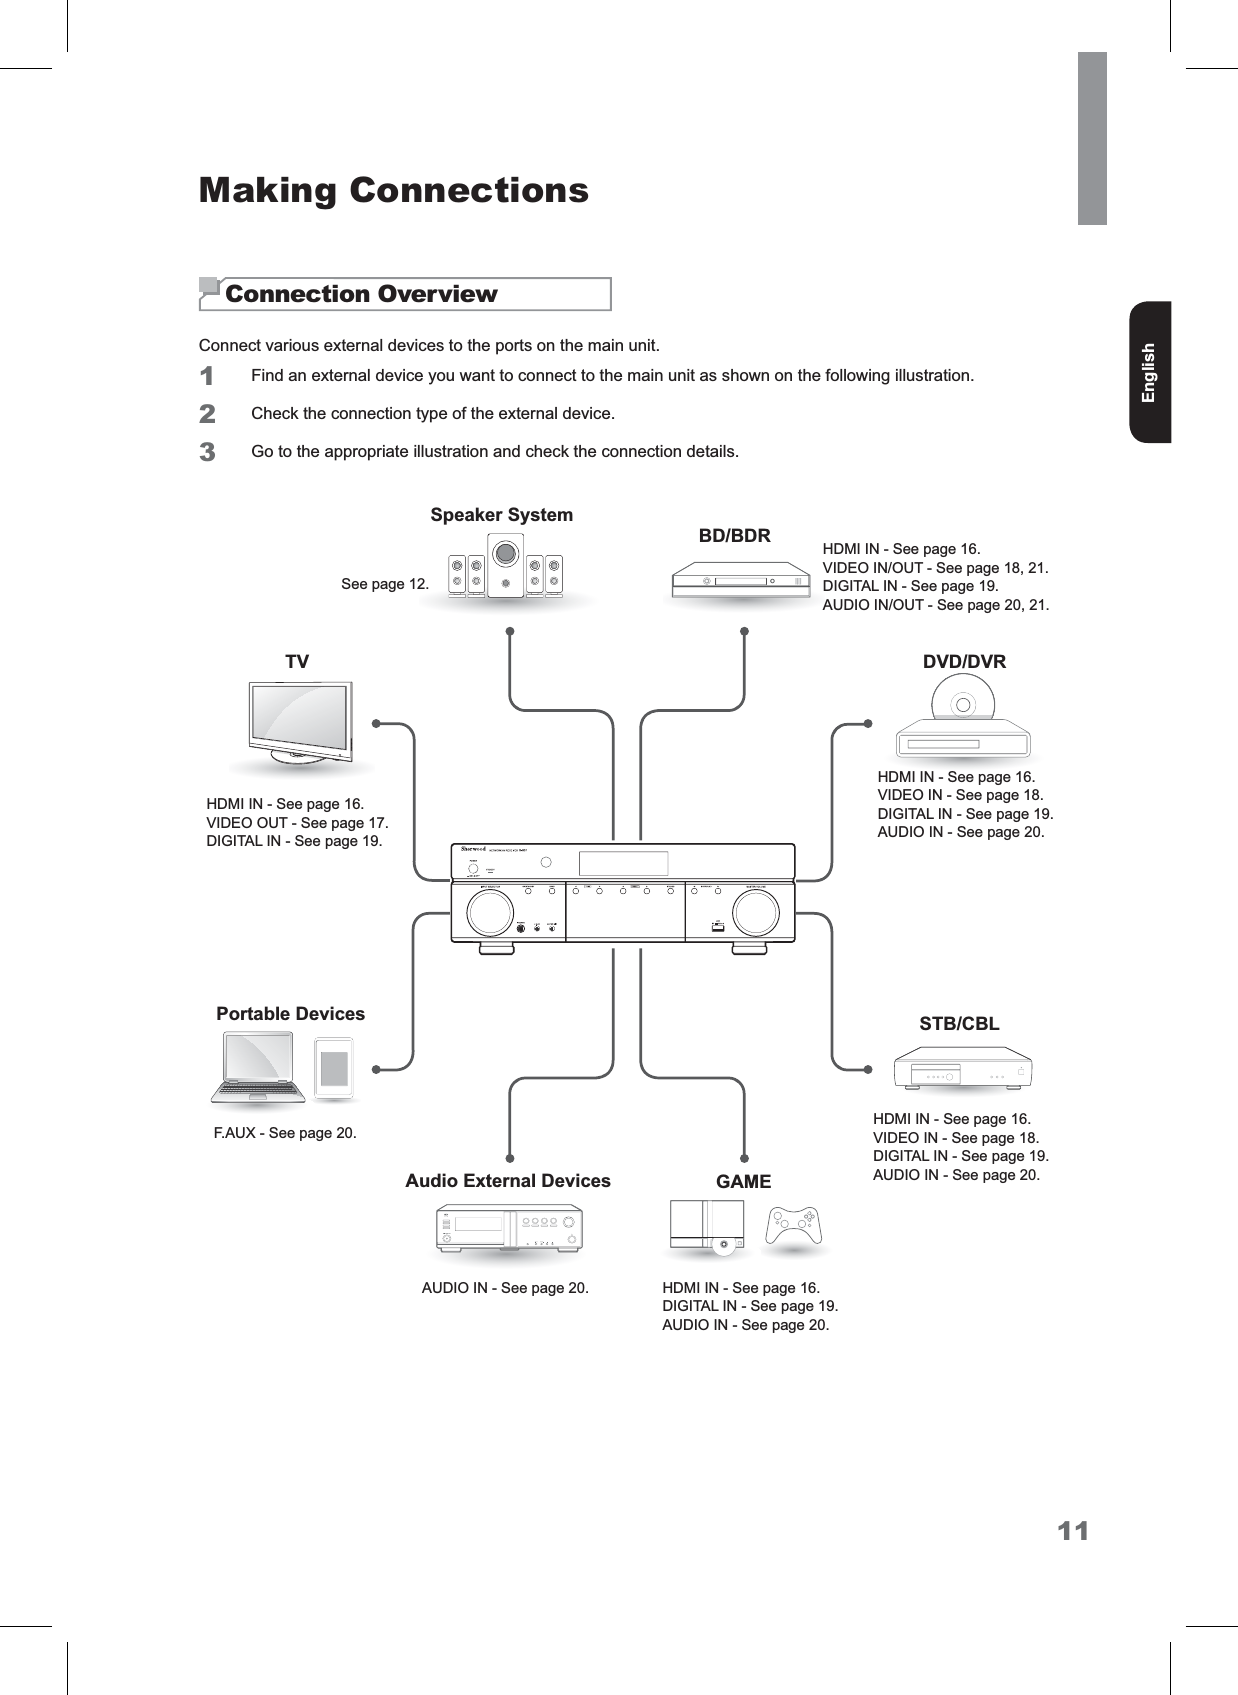 11EnglishMaking ConnectionsConnection OverviewConnect various external devices to the ports on the main unit.1Find an external device you want to connect to the main unit as shown on the following illustration.2&amp;KHFNWKHFRQQHFWLRQW\SHRIWKHH[WHUQDOGHYLFH3*RWRWKHDSSURSULDWHLOOXVWUDWLRQDQGFKHFNWKHFRQQHFWLRQGHWDLOVHDMI IN - See page 16.VIDEO OUT - See page 17.DIGITAL IN - See page 19.TV%&apos;%&apos;5Speaker System&apos;9&apos;&apos;9567%&amp;%/GAMEAudio External DevicesPortable DevicesHDMI IN - See page 16.VIDEO IN/OUT - See page 18, 21.DIGITAL IN - See page 19.AUDIO IN/OUT - See page 20, 21.See page 12.HDMI IN - See page 16.VIDEO IN - See page 18.DIGITAL IN - See page 19.AUDIO IN - See page 20.HDMI IN - See page 16.VIDEO IN - See page 18.DIGITAL IN - See page 19.AUDIO IN - See page 20.HDMI IN - See page 16.DIGITAL IN - See page 19.AUDIO IN - See page 20.AUDIO IN - See page 20.F.AUX - See page 20.